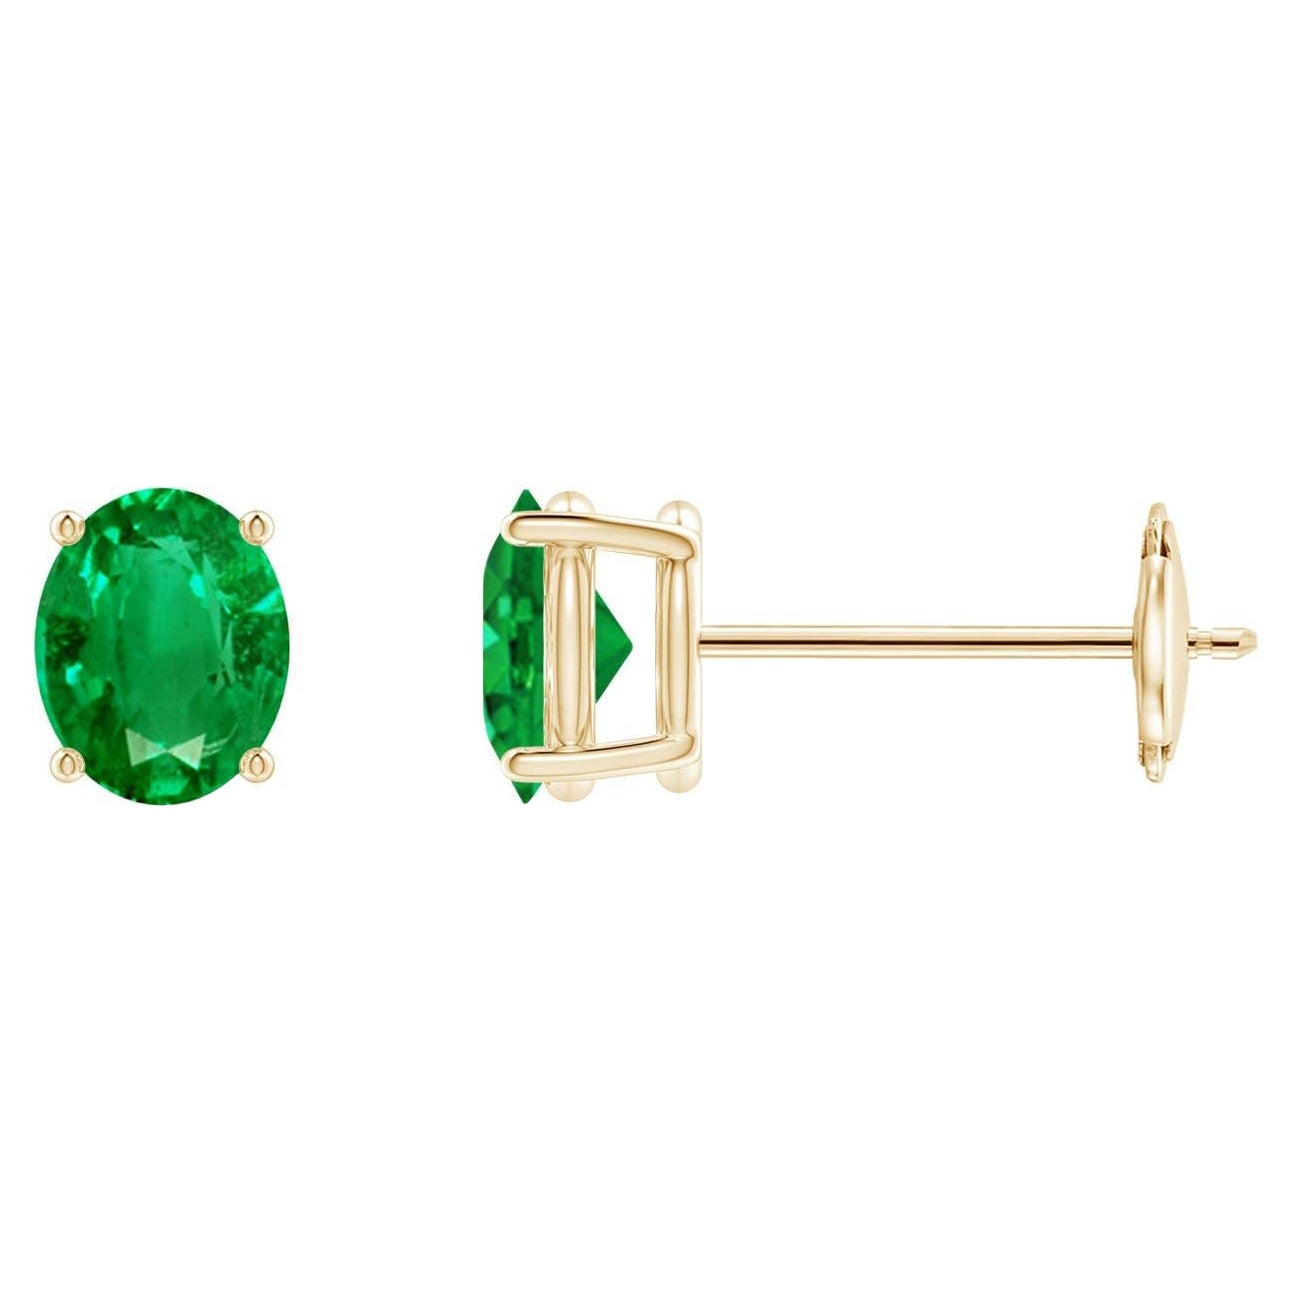 Natural Solitaire Oval 0.60 Emerald Stud Earrings in 14K Yellow Gold